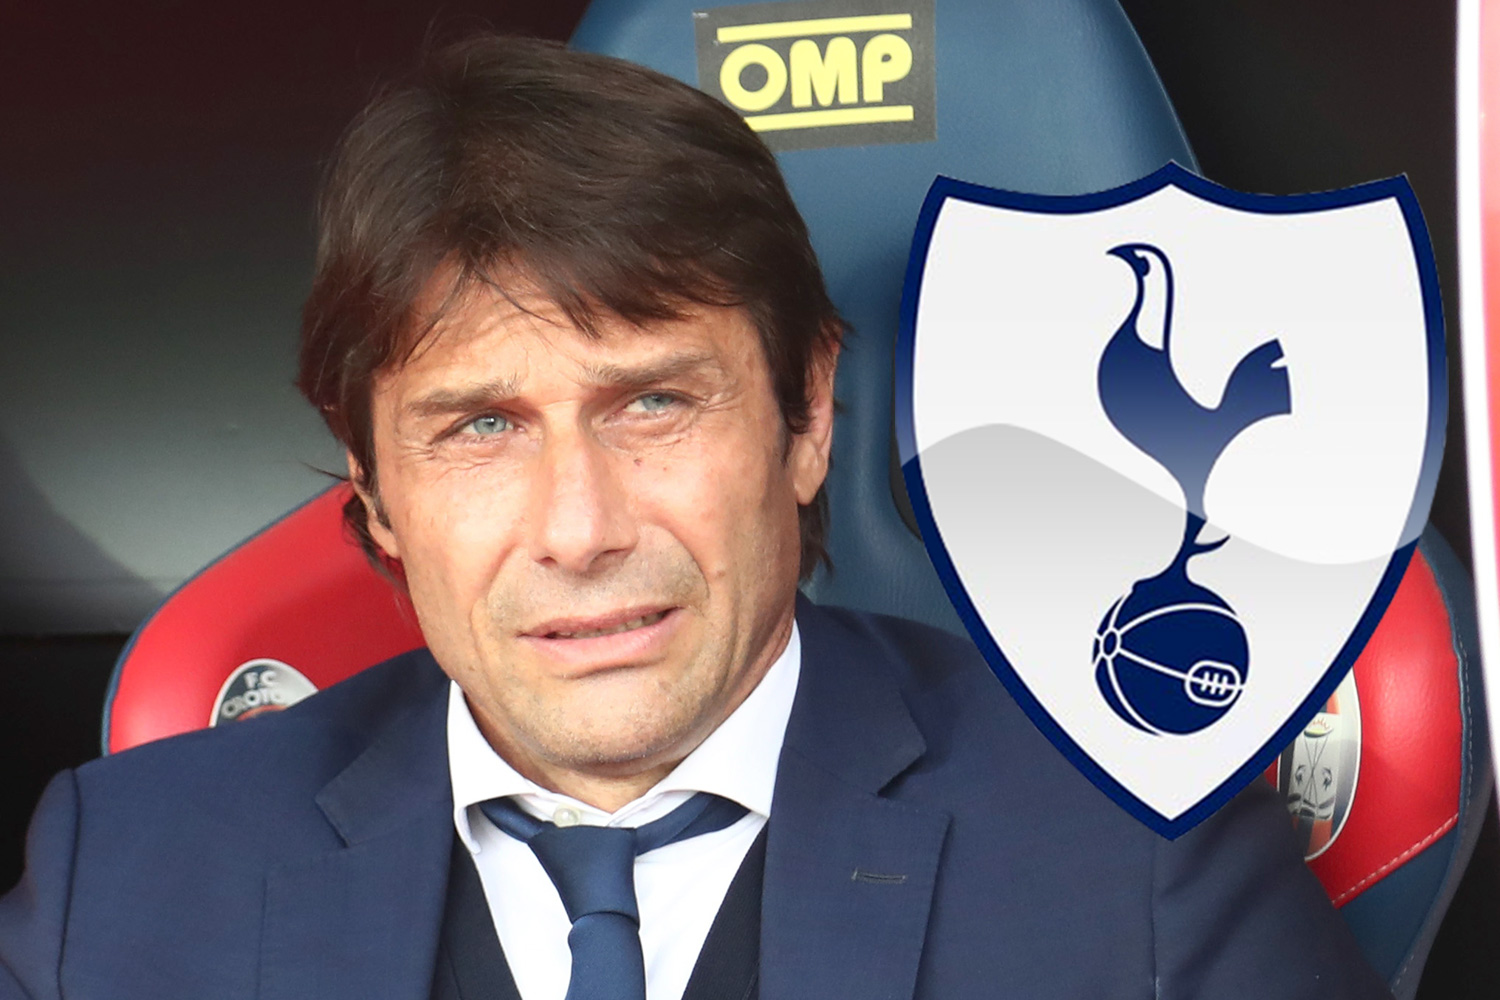 Former Spurs boss Antonio Conte is being considered for manager job